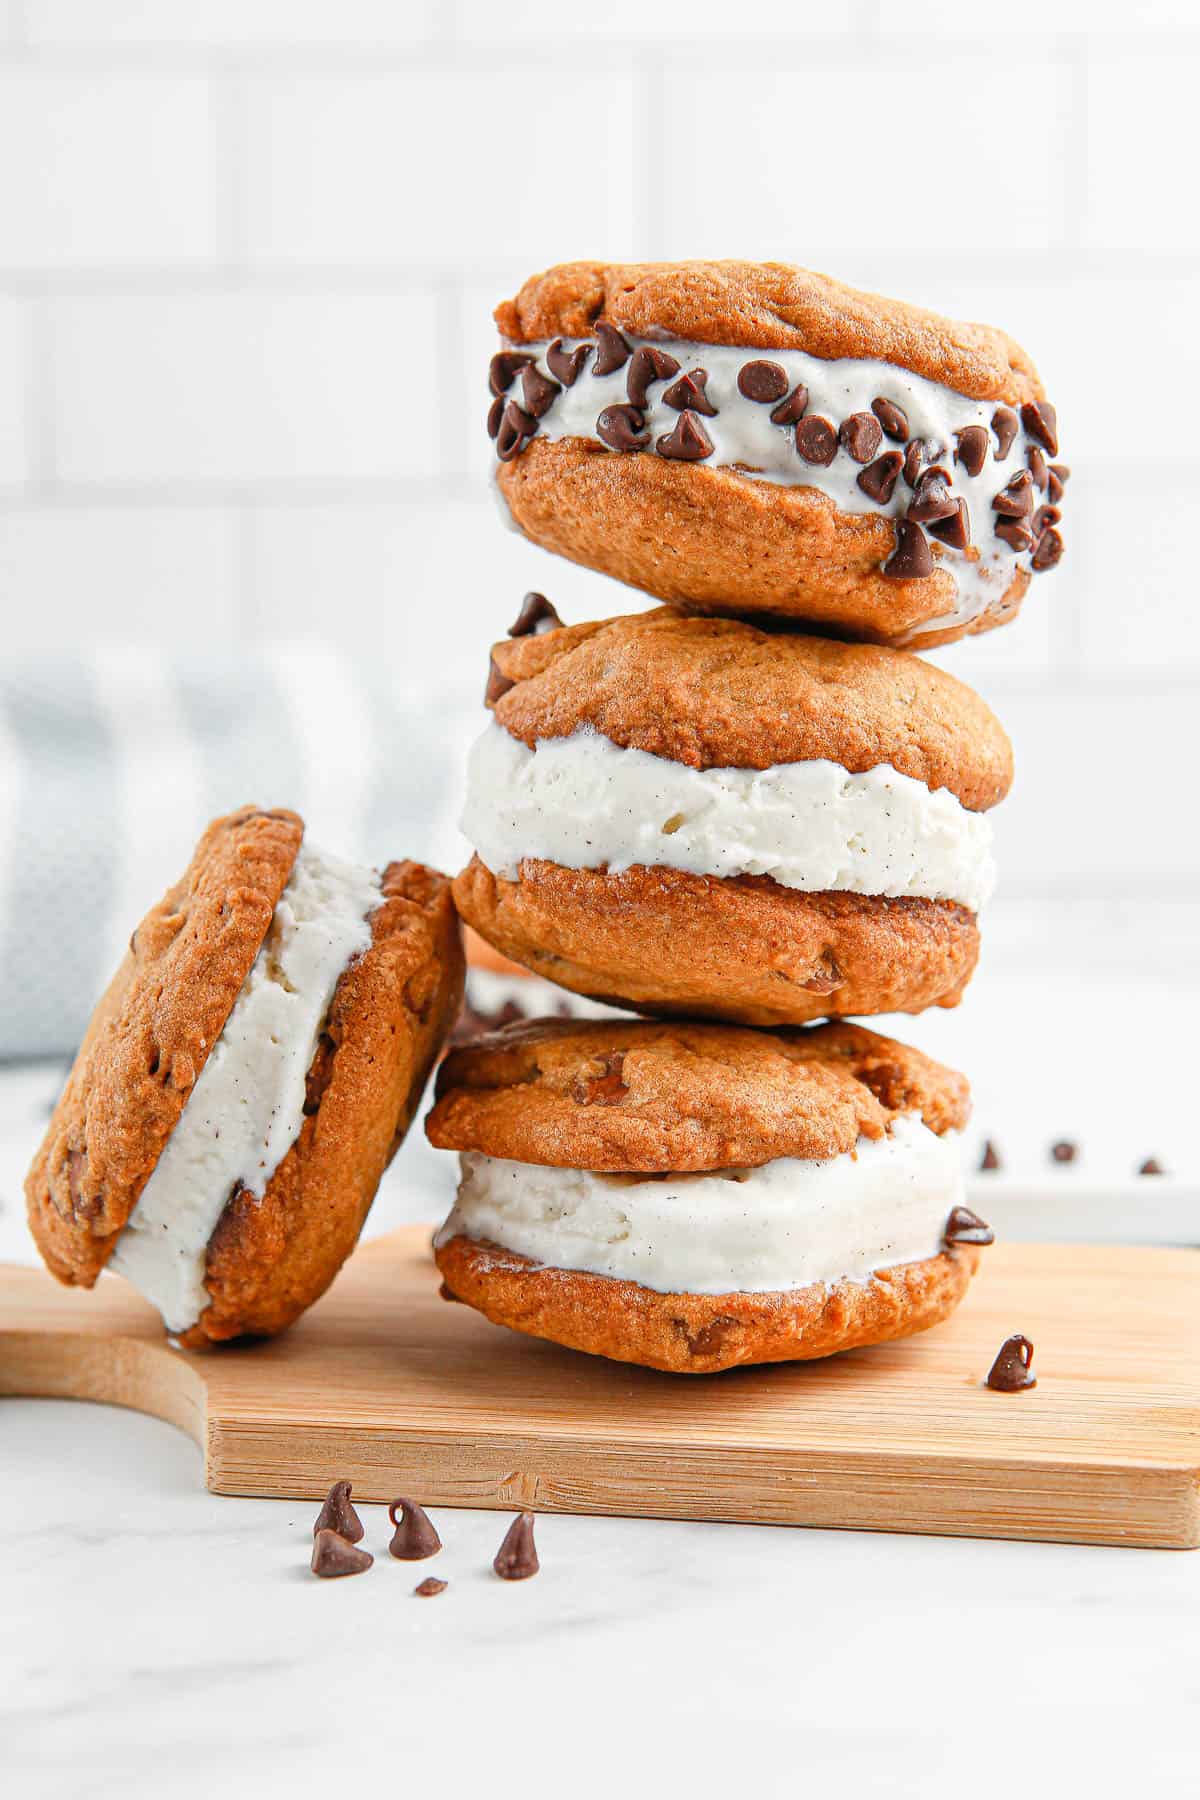 A stack of three chocolate chip cookie ice cream sandwiches with mini chocolate chips stuck to the ice cream on the top one.